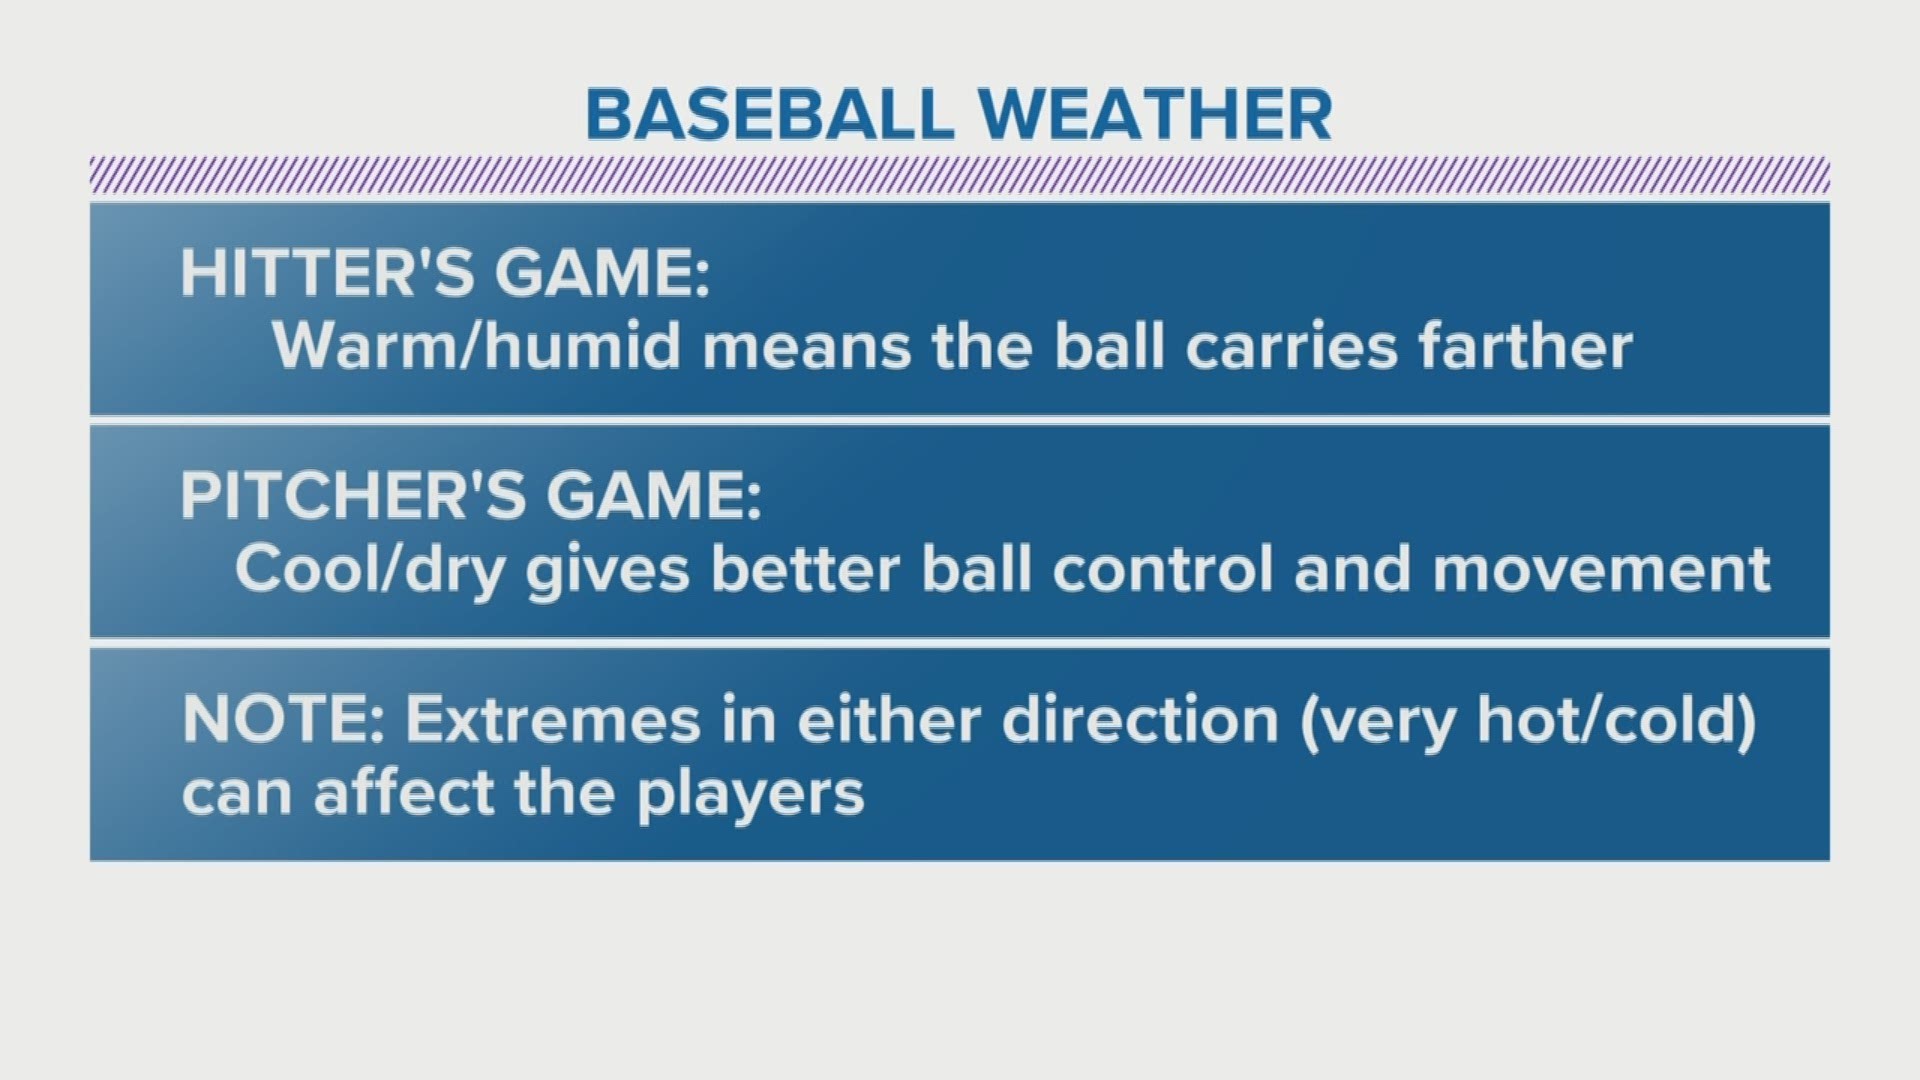 How does the weather impact whether the hitter's or the pitcher has a better game?